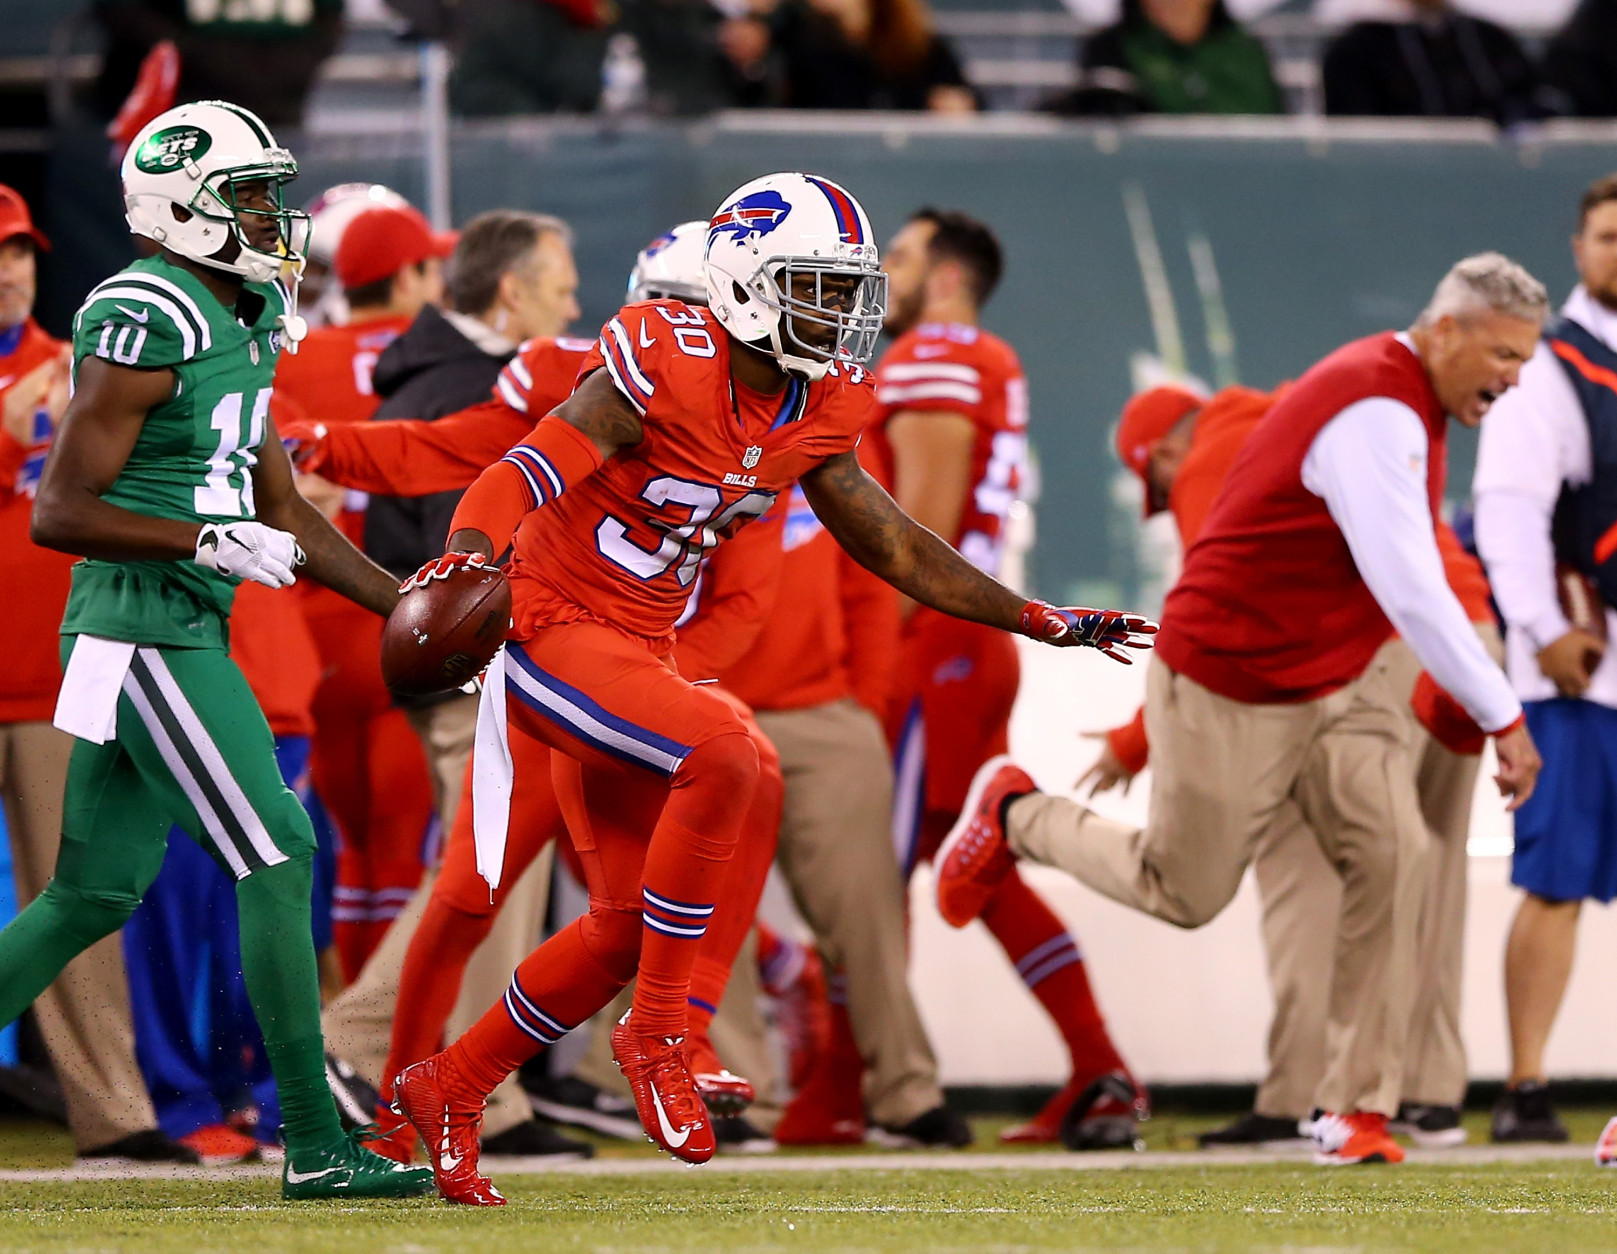 EAST RUTHERFORD, NJ - NOVEMBER 12:  Bacarri Rambo #30 of the Buffalo Bills celebrates after he intercepted the ball in the final minute of the game as Kenbrell Thompkins #10 of the New York Jets walks off the field on November 12, 2015 at MetLife Stadium in East Rutherford, New Jersey.The Buffalo Bills defeated the New York Jets 22-17.Buffalo Bills head coach Rex Ryan celebrates on the sideline.  (Photo by Elsa/Getty Images)